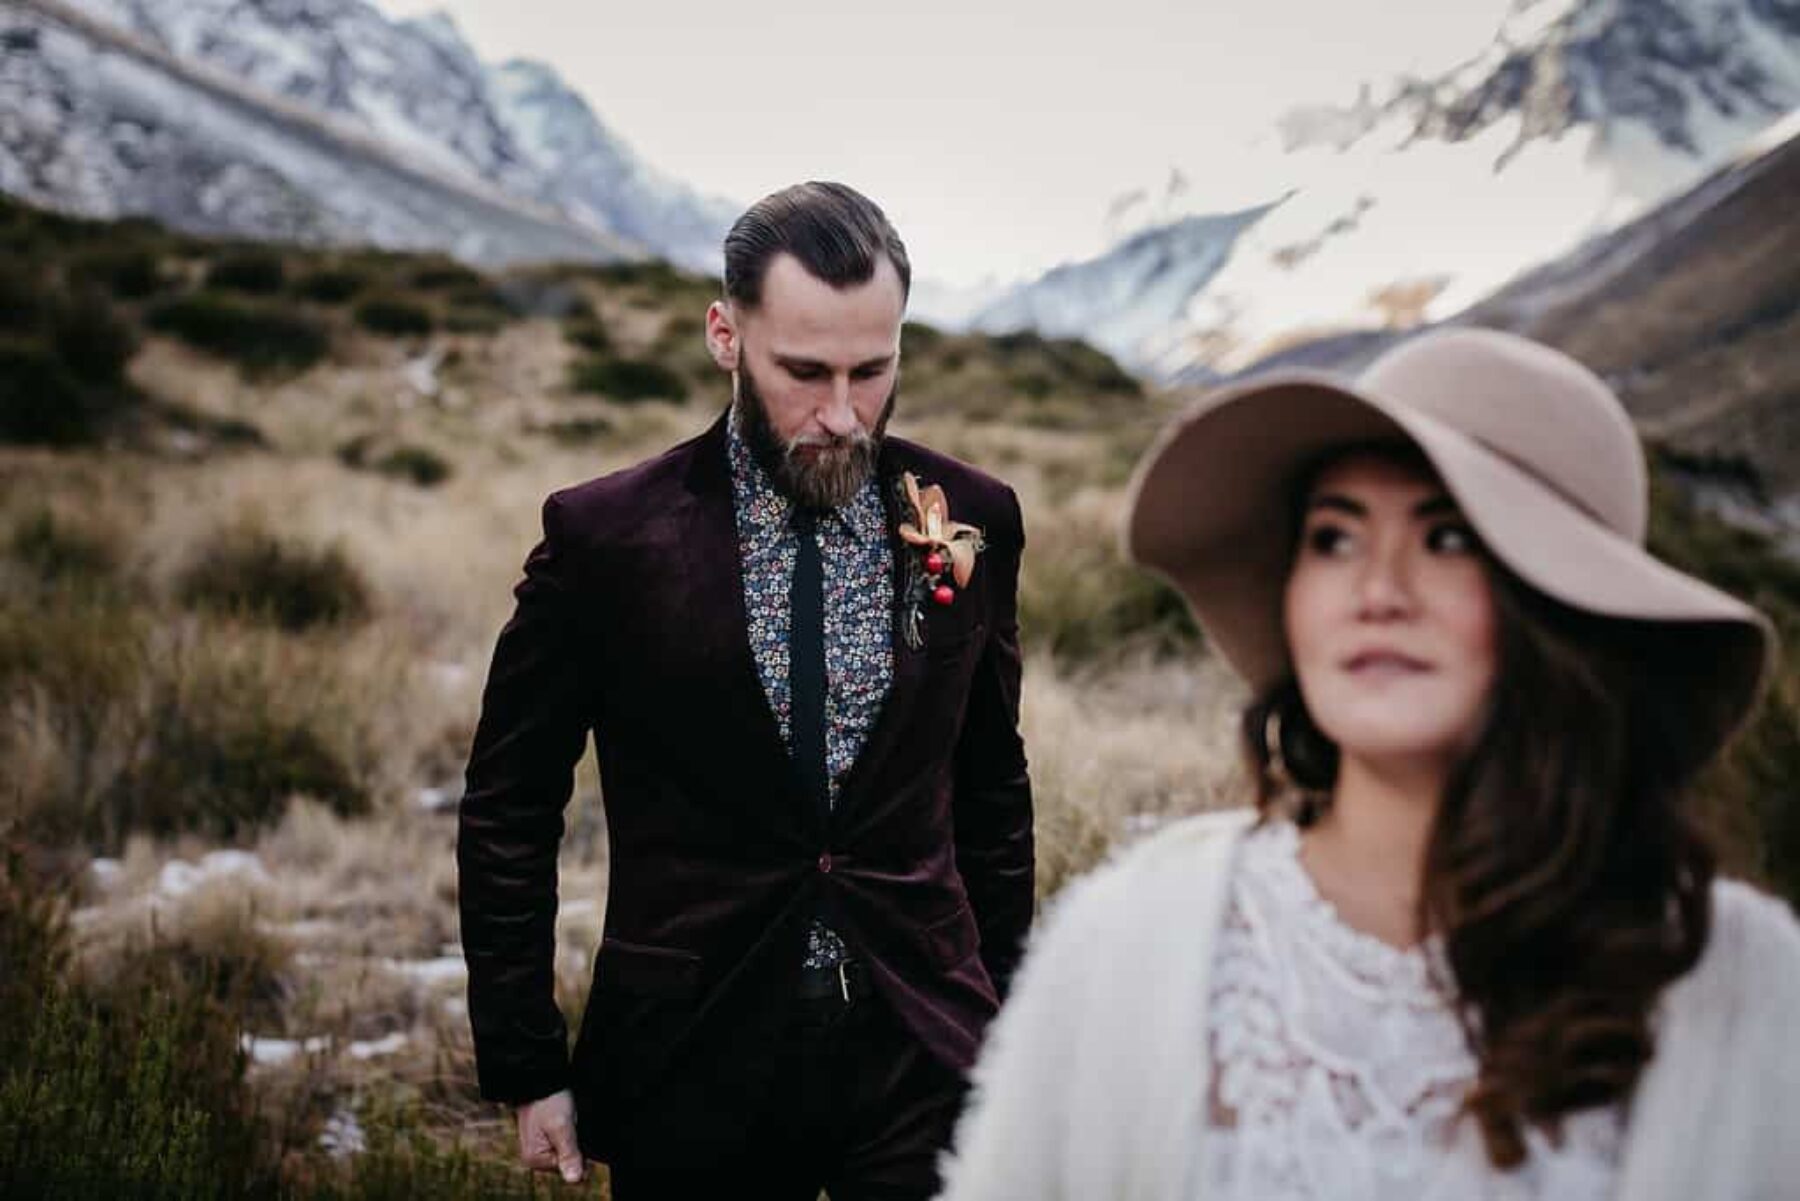 Boho bride and groom in burgundy suit with floral shirt